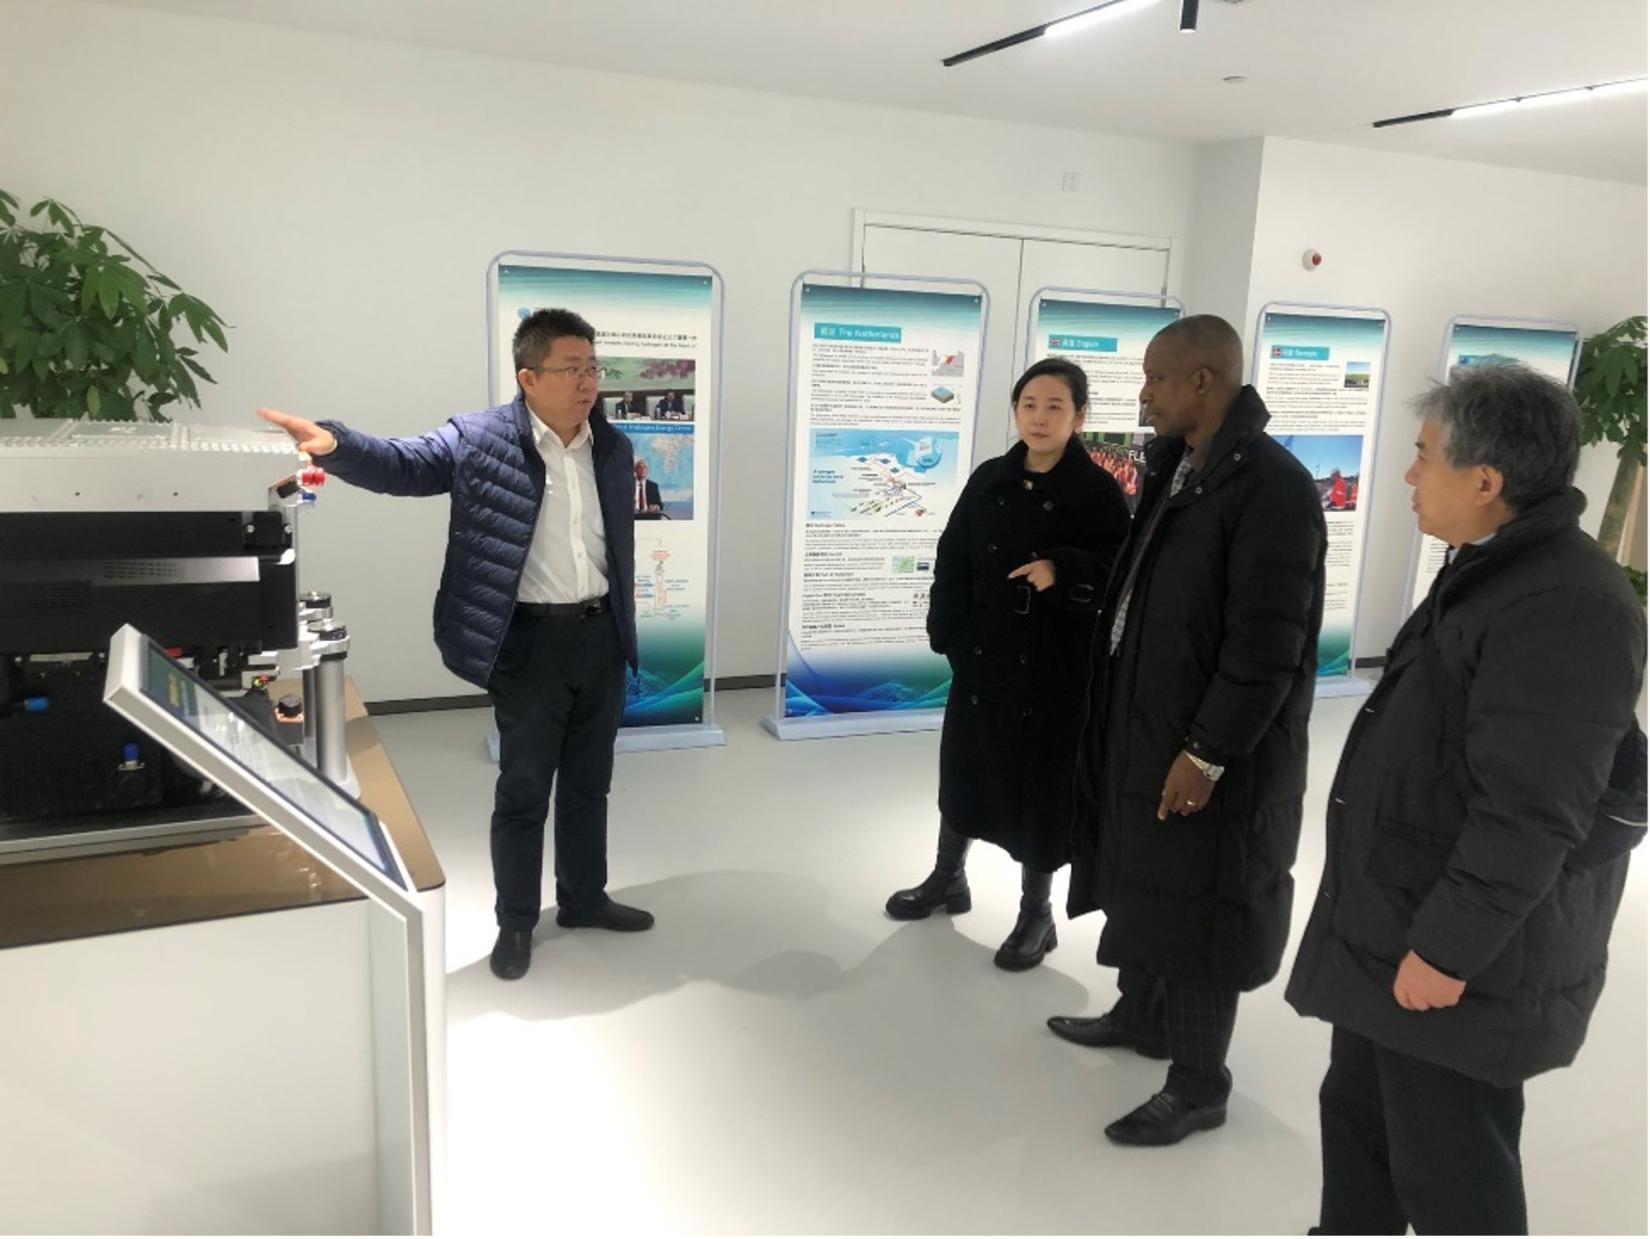 Mr. Stephen Kargbo visited the International Hydrogen Energy Centre under UNIDO’s cooperation with Tsinghua Industrial Development Research Institute